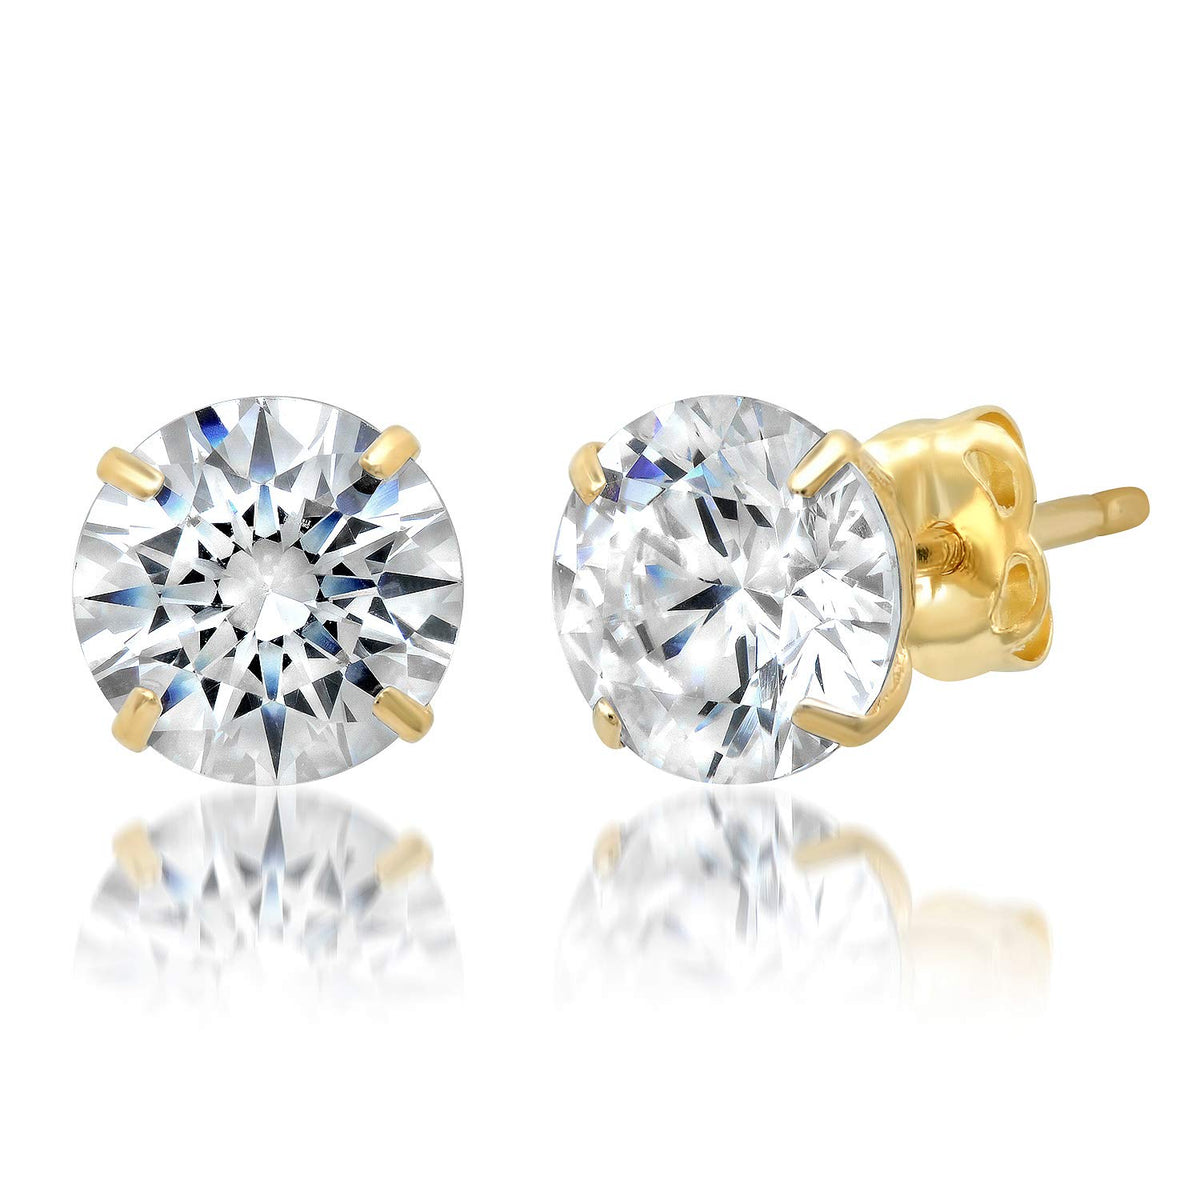 14k Yellow Gold Round Cut White Cubic Zirconia Stud Earrings